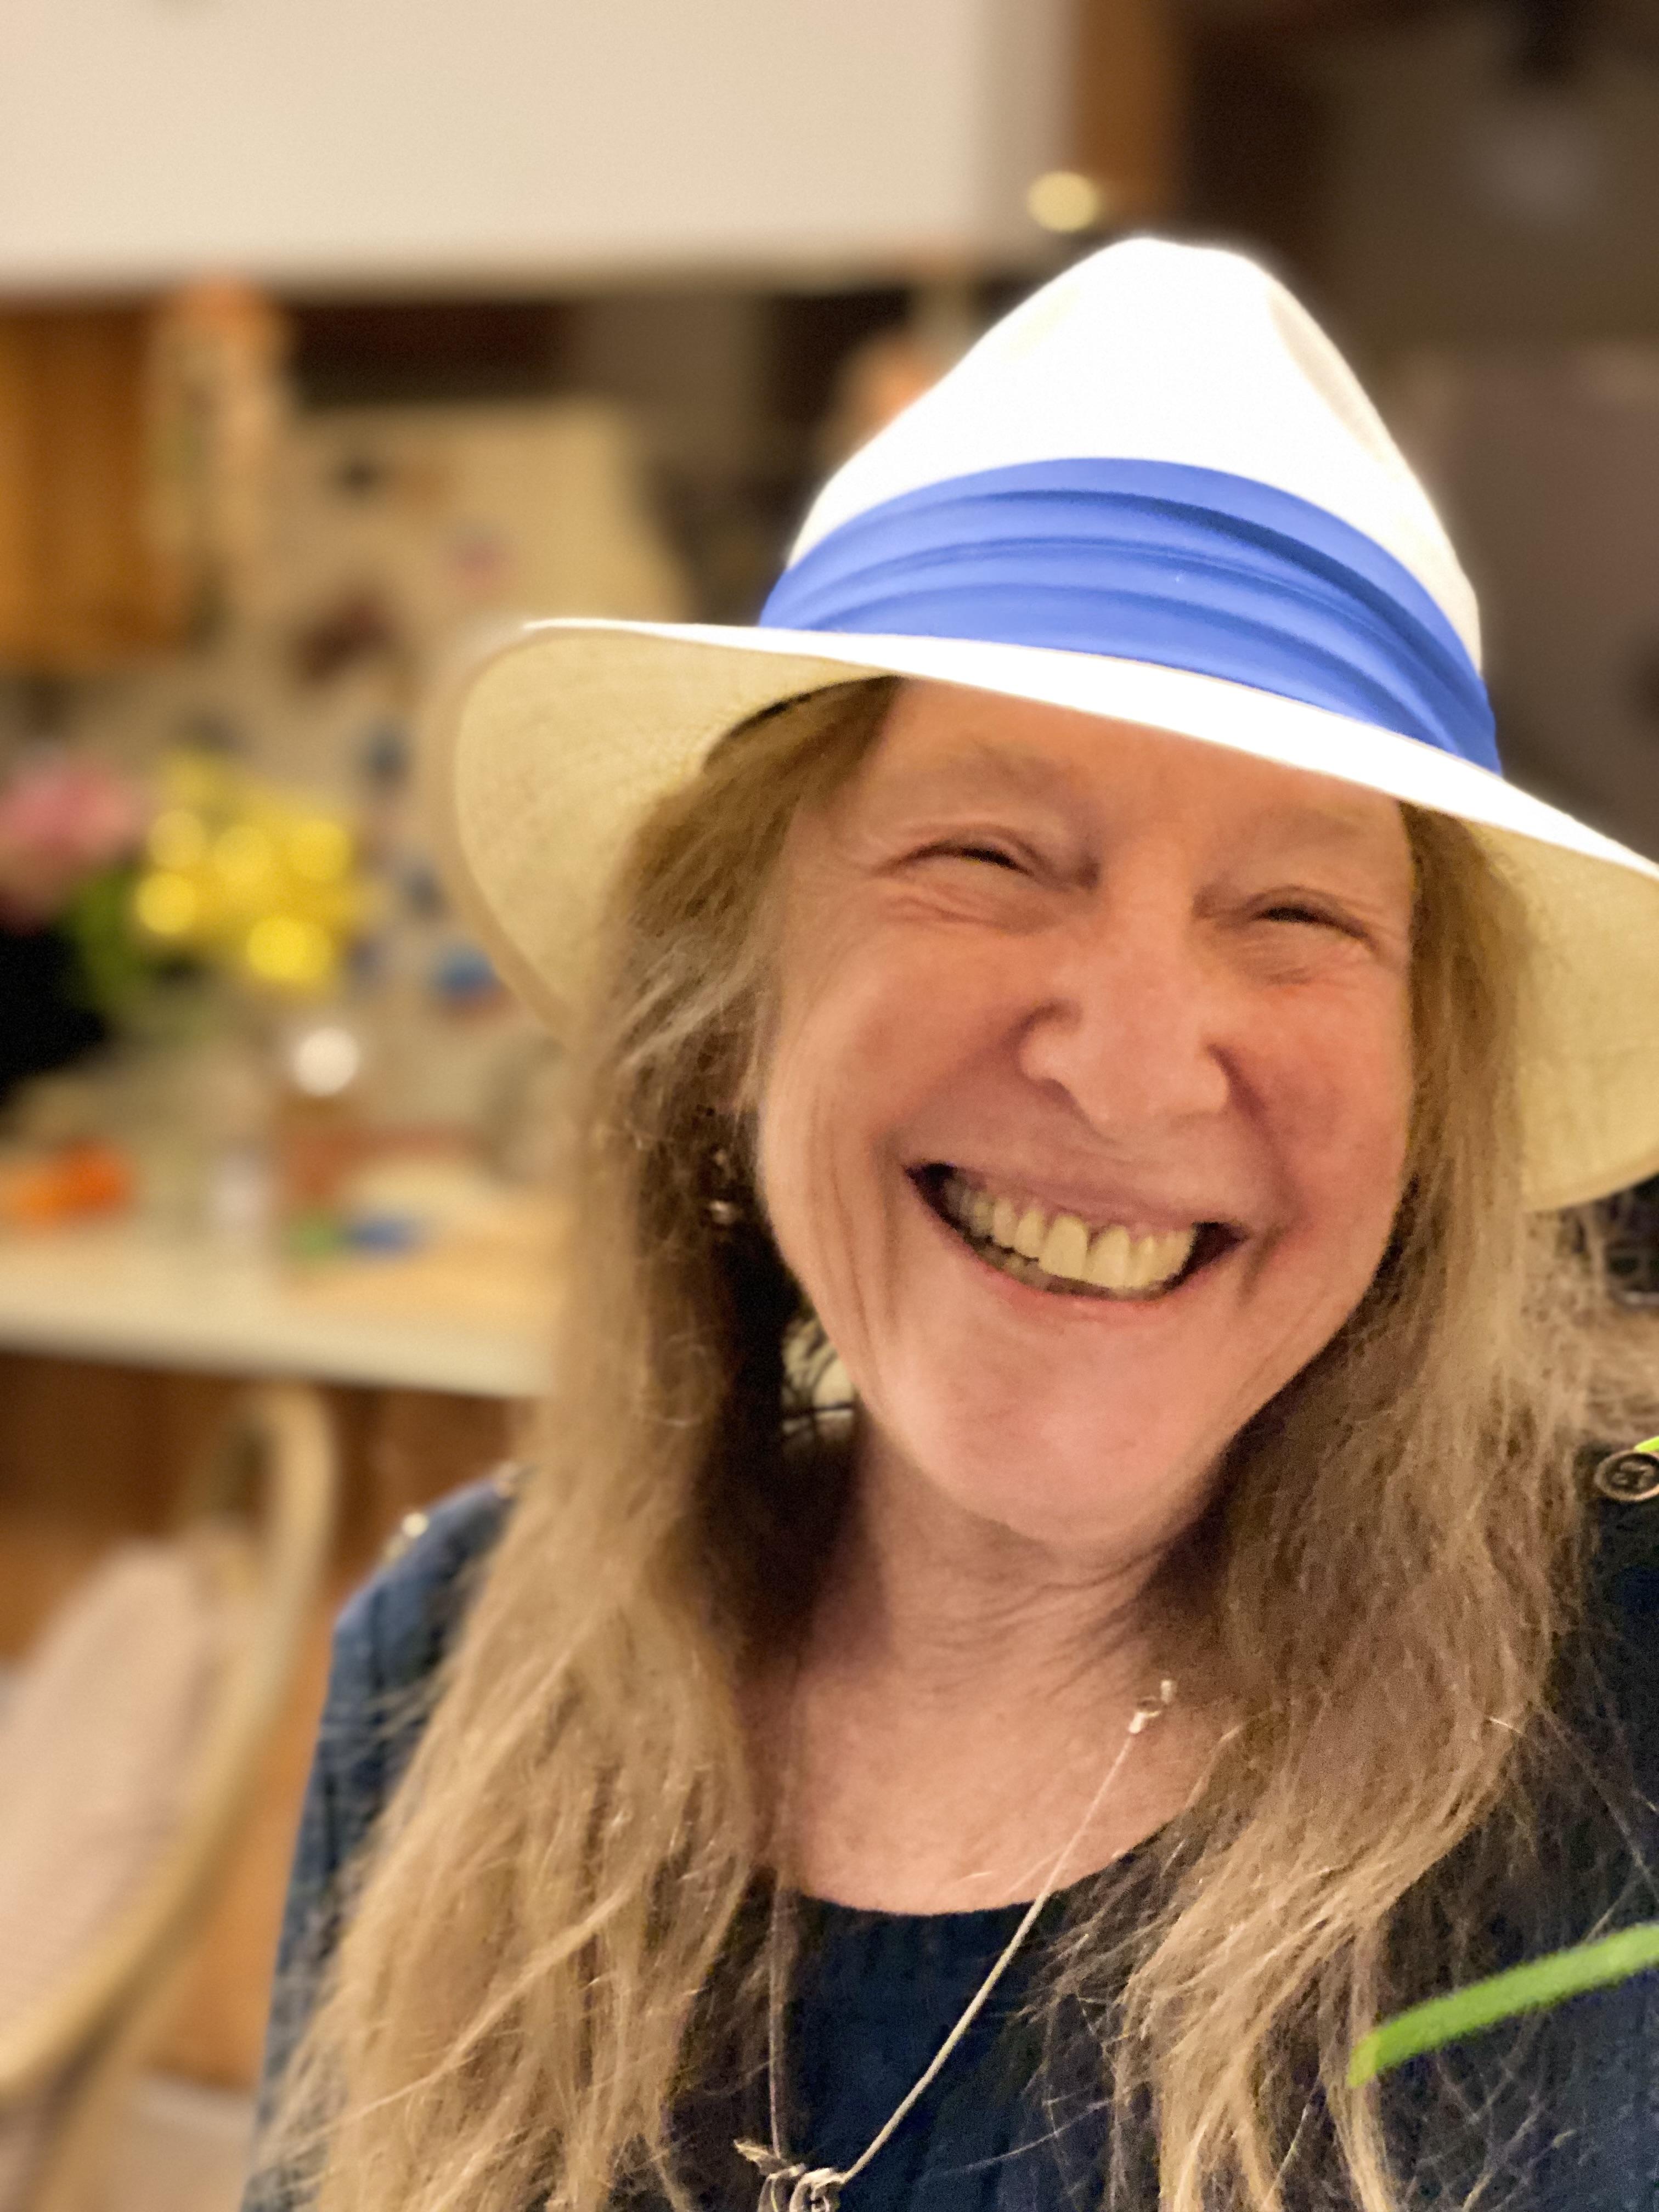 Smiling woman with long blonde/brown hair and straw hat with blue band